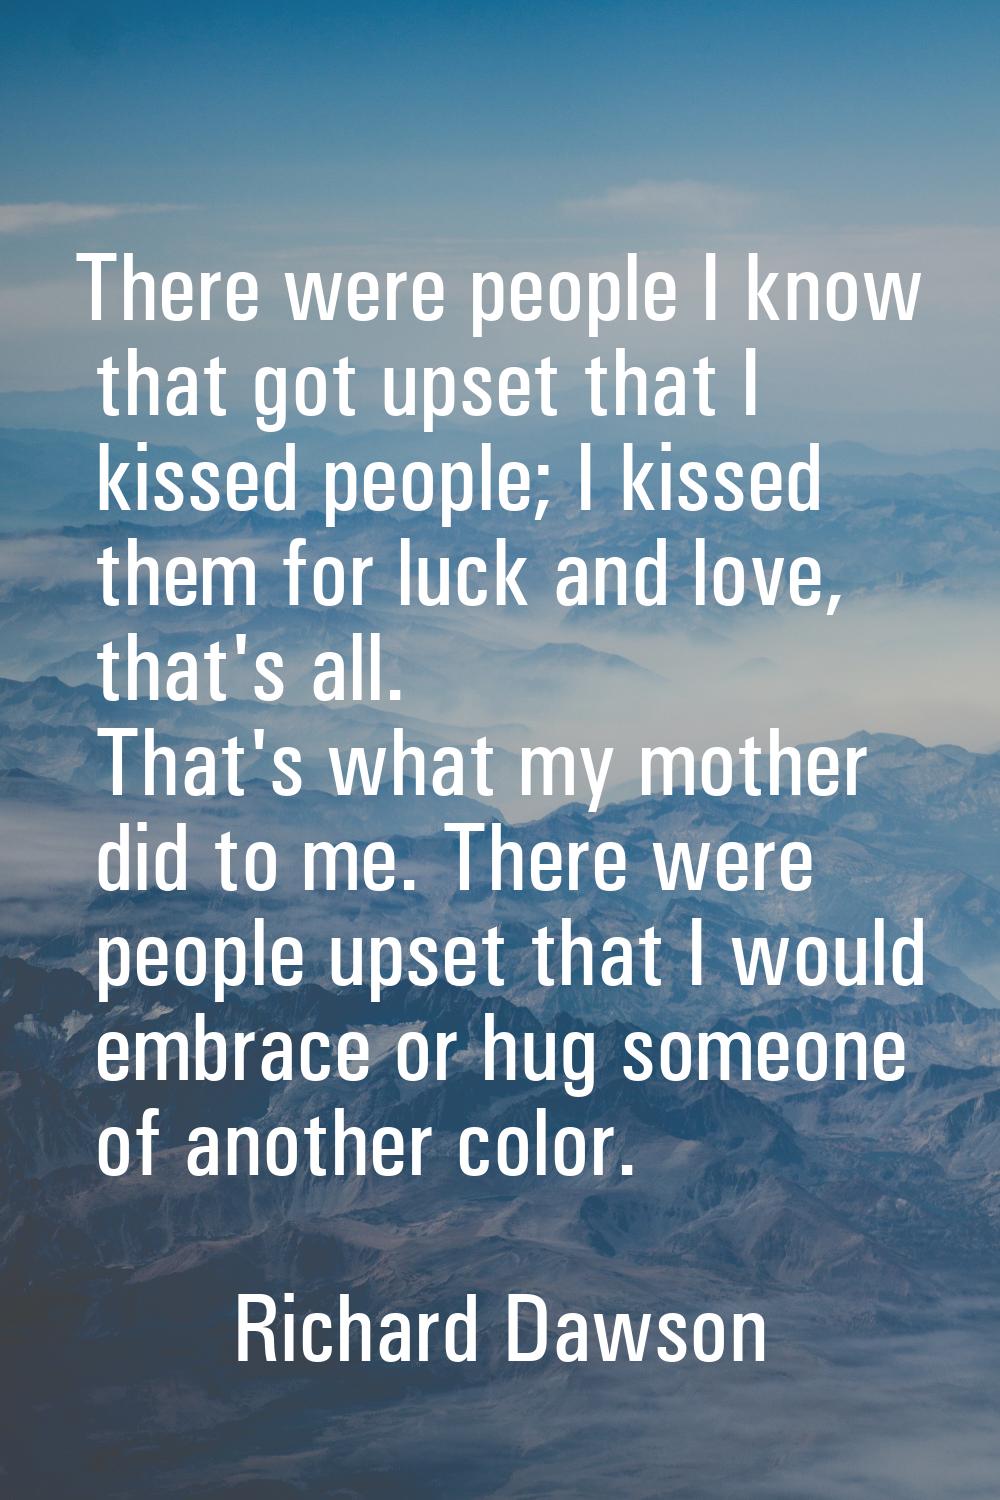 There were people I know that got upset that I kissed people; I kissed them for luck and love, that